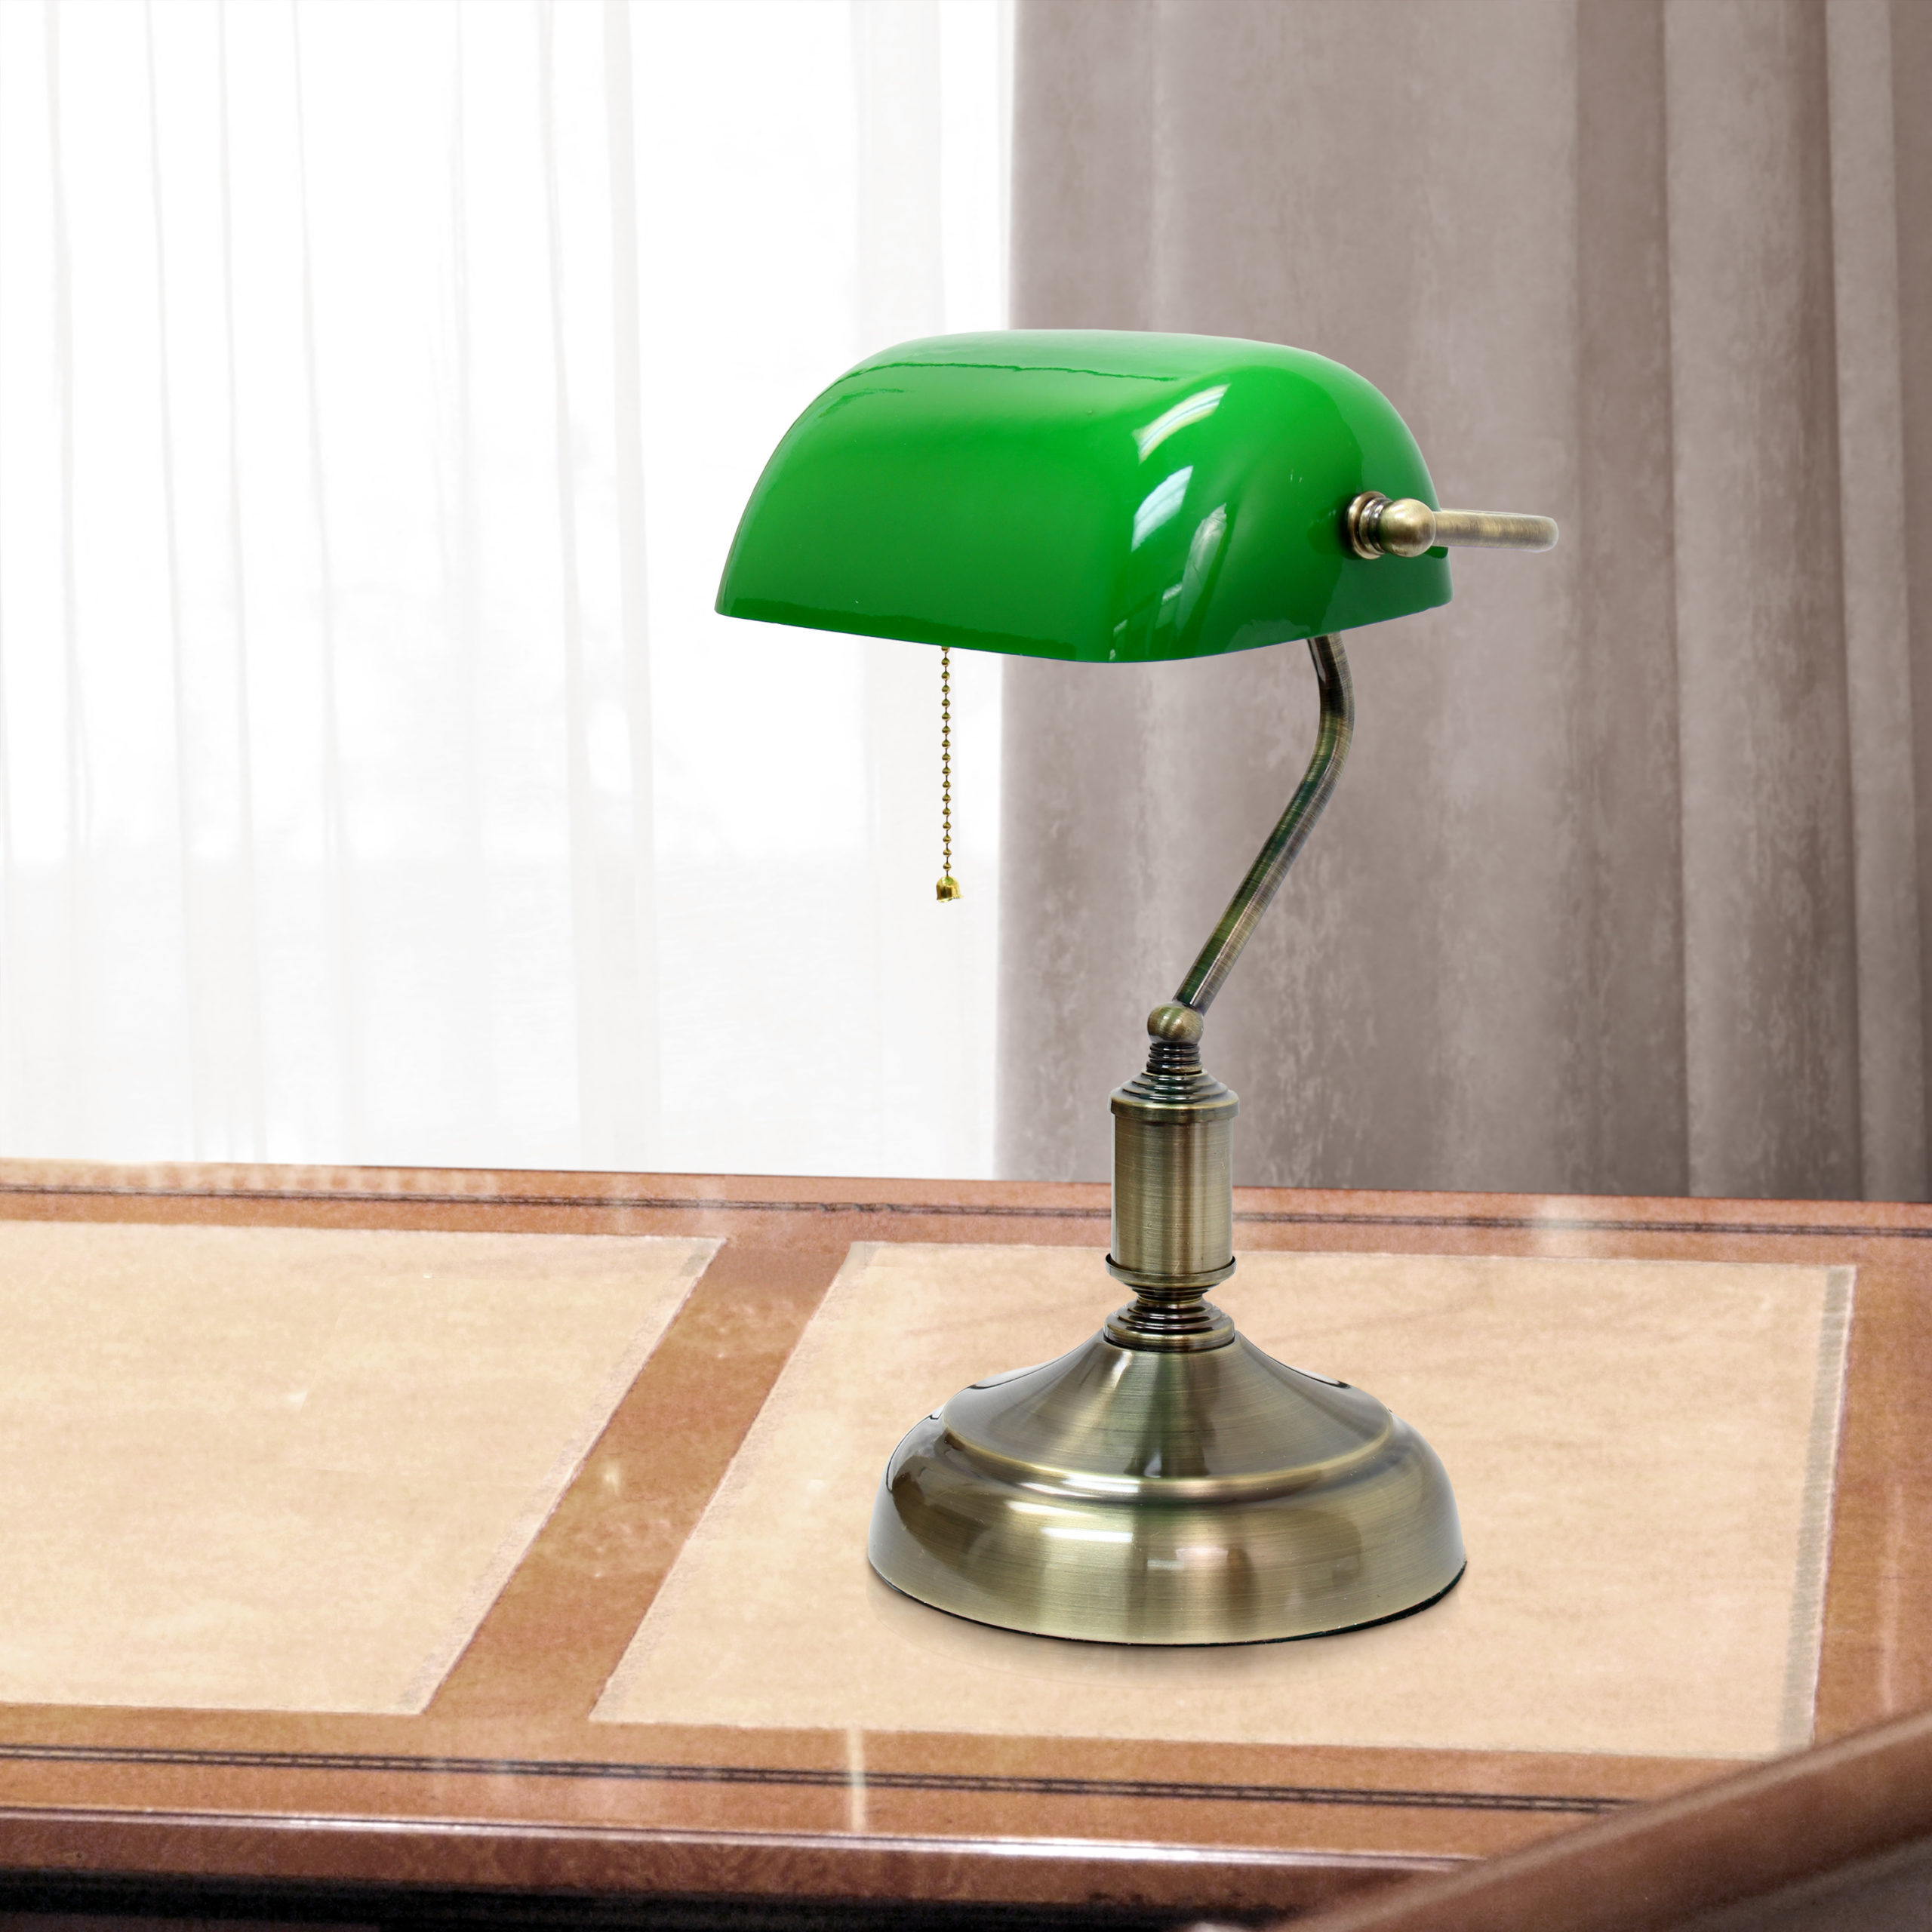 Catalina Lighting Executive Bankers Desk Lamp with Glass Shade Green.